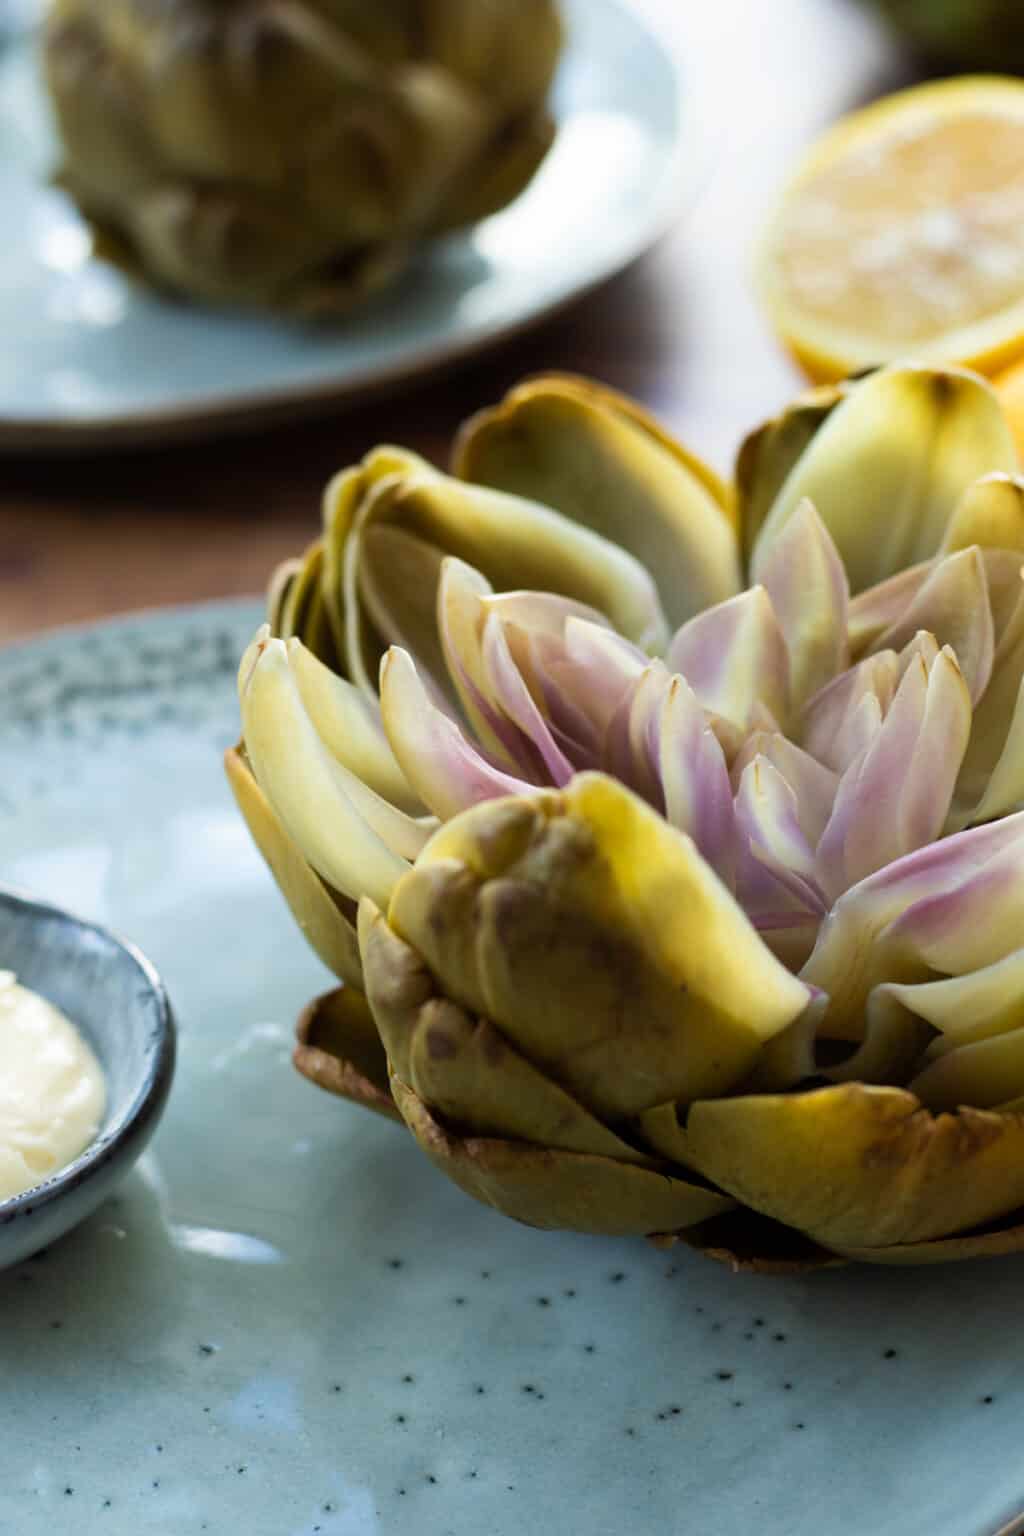 Boiled Artichokes With Whipped Lemon Butter How To Steam Them 9579